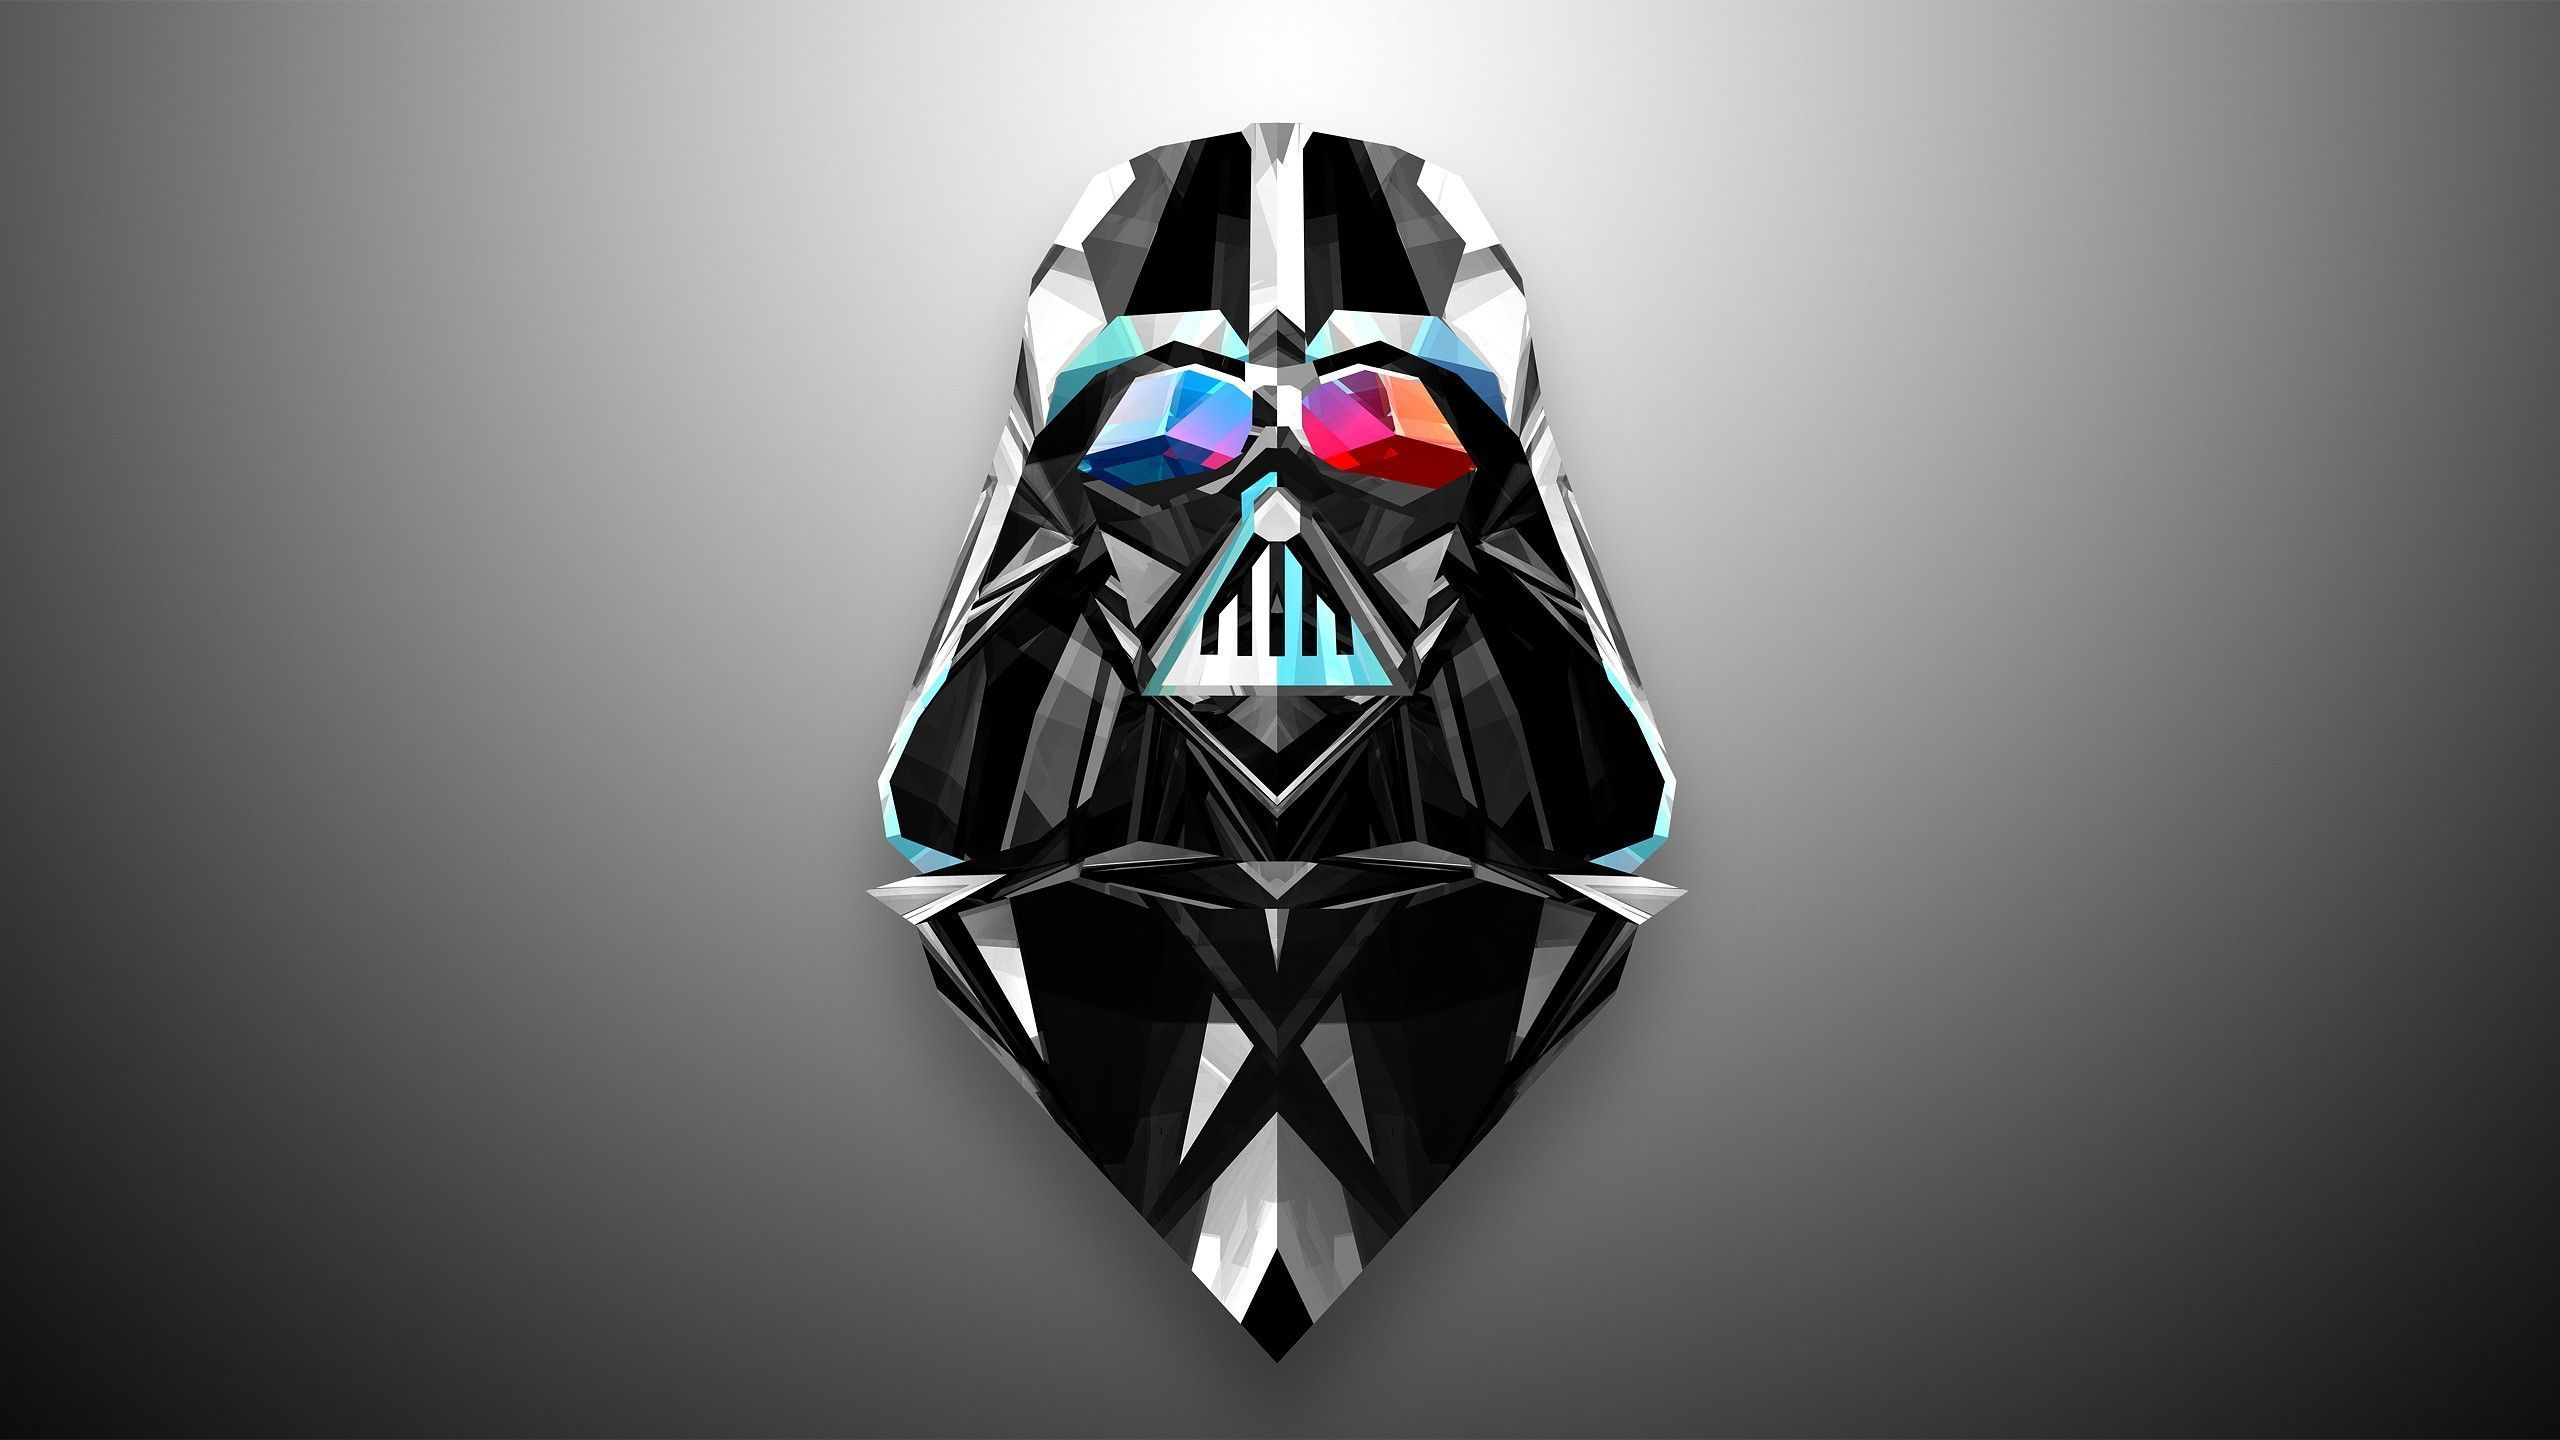 174 Darth Vader HD Wallpapers Backgrounds - Wallpaper Abyss